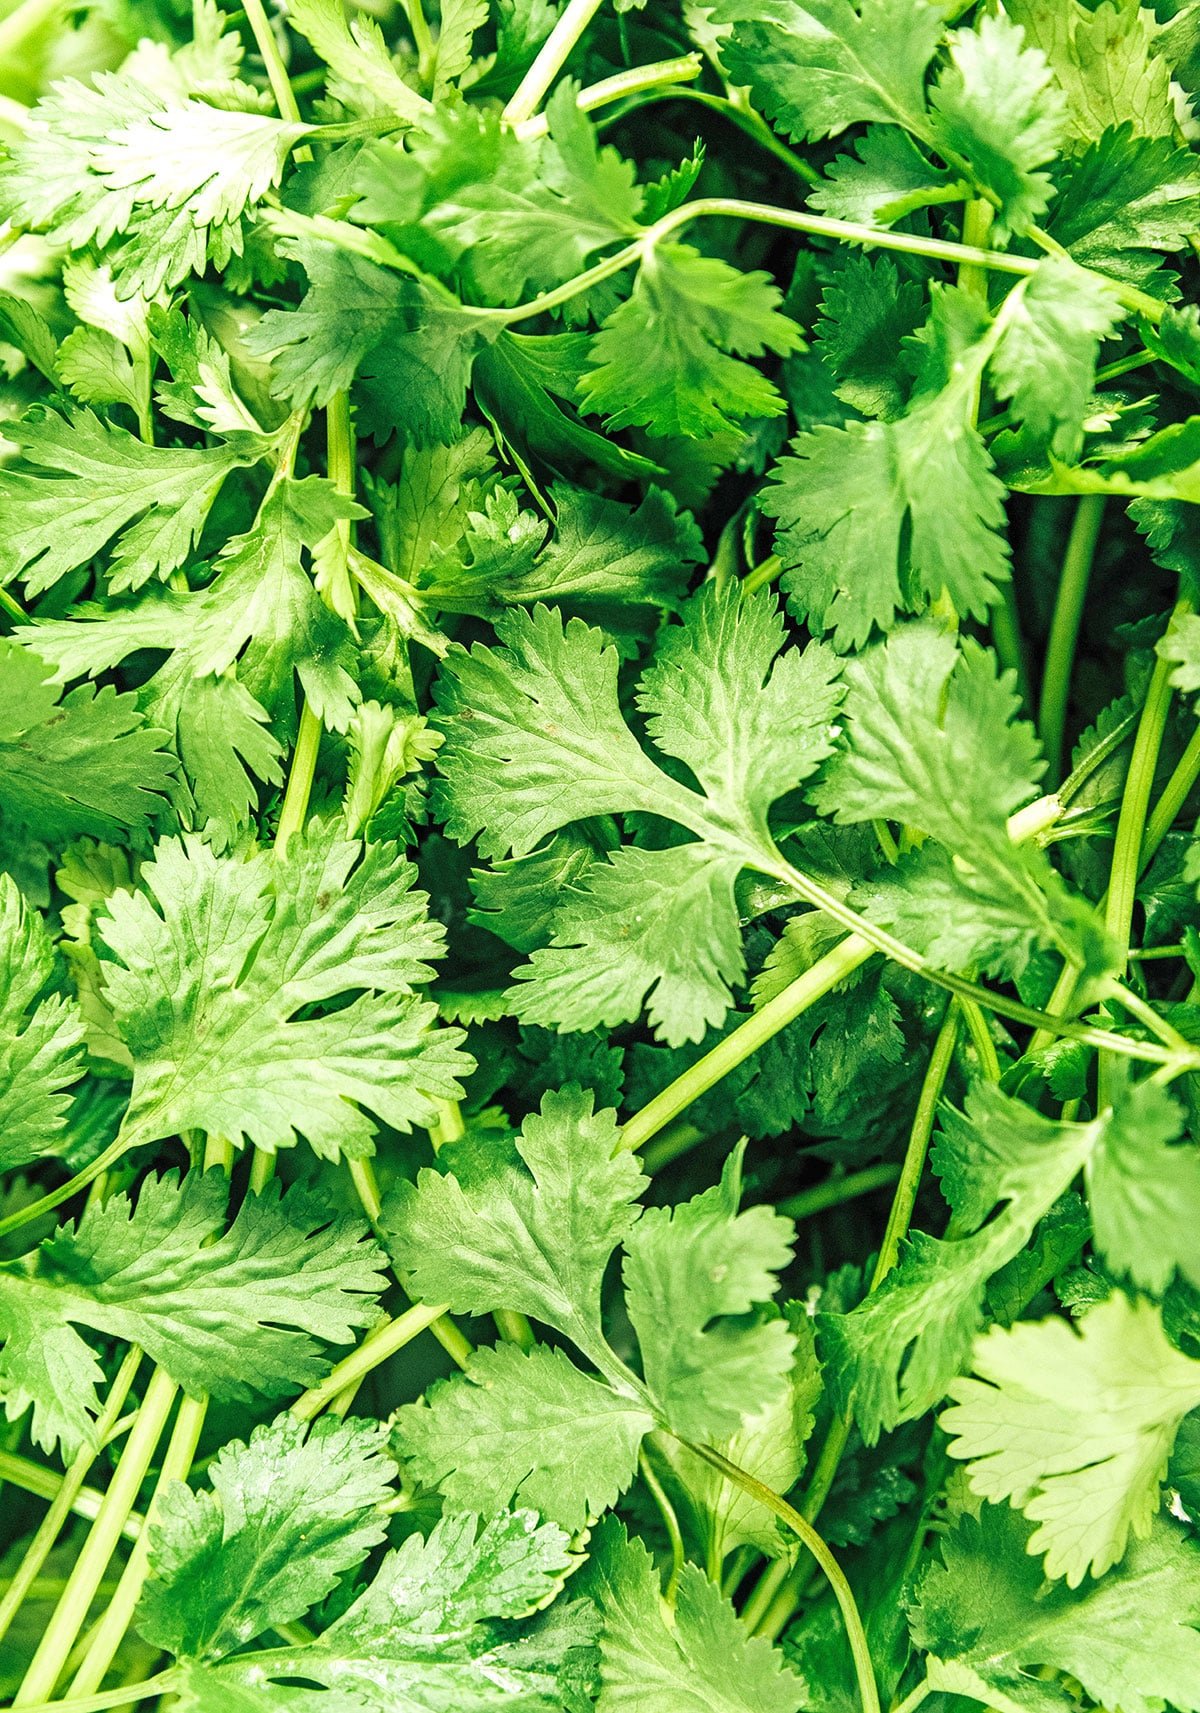 An up close view detailing the color and texture of cilantro